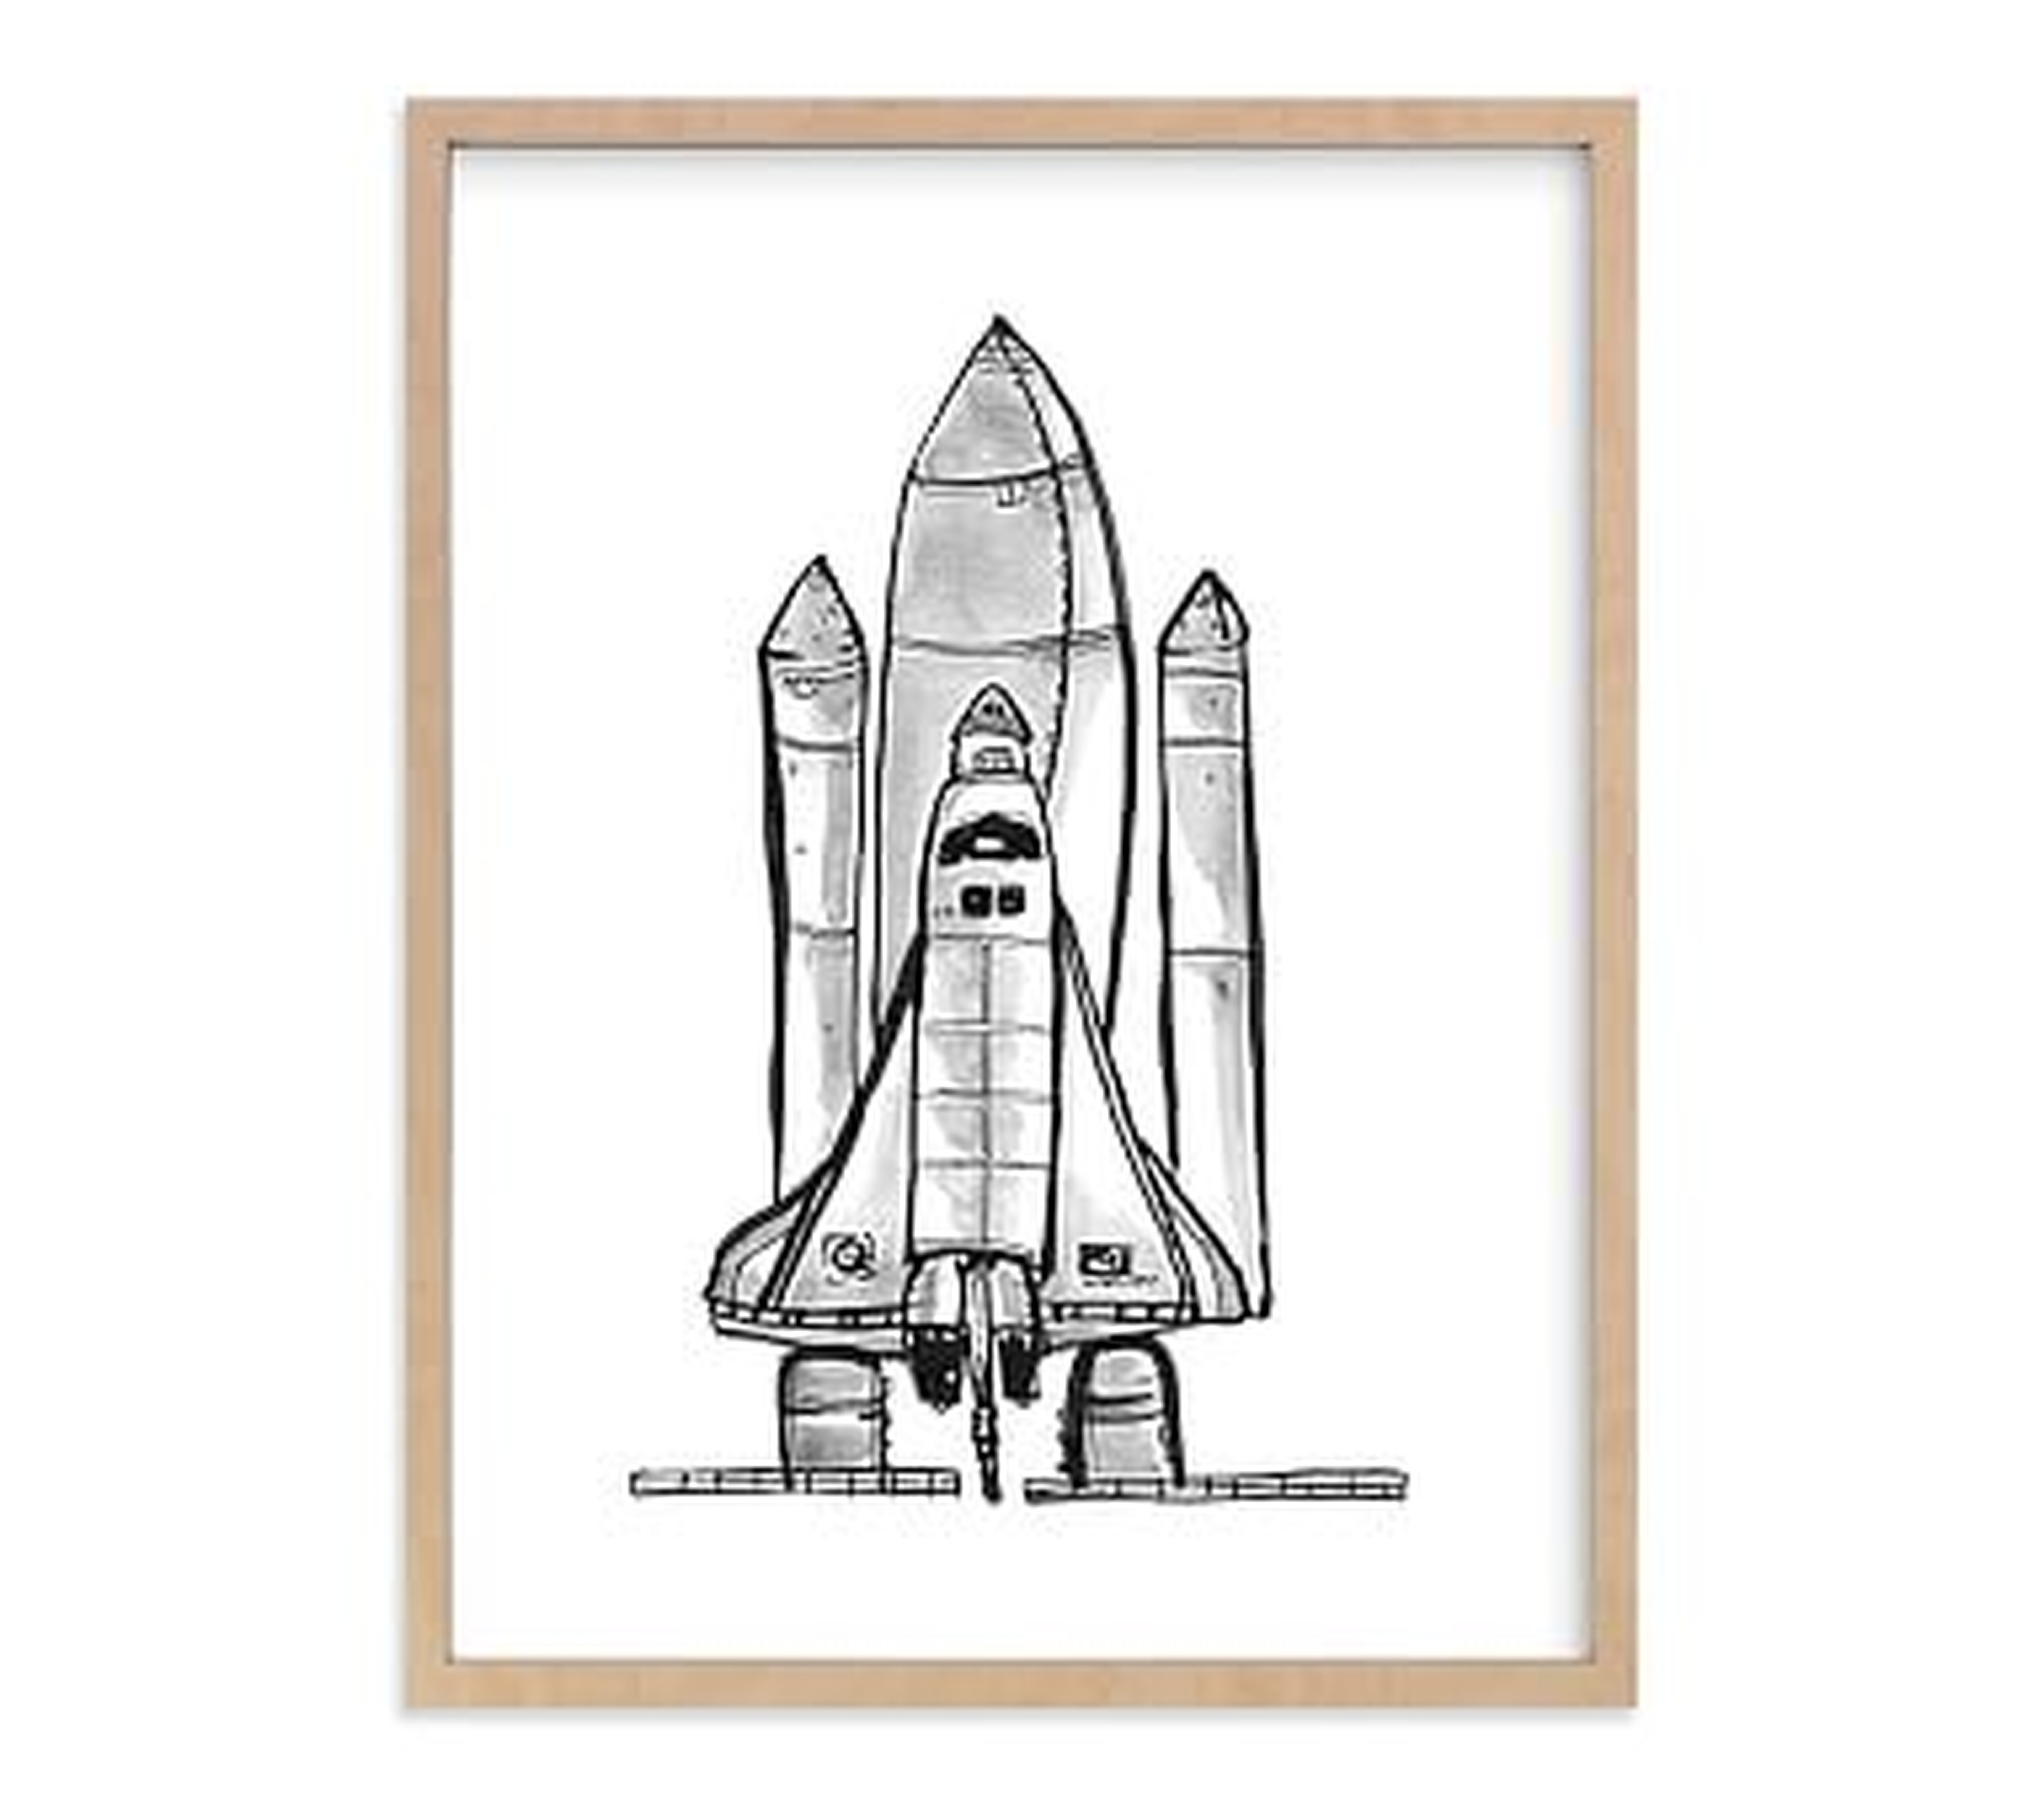 Blast Off Wall Art By Minted(R),18x24, Natural - Pottery Barn Kids